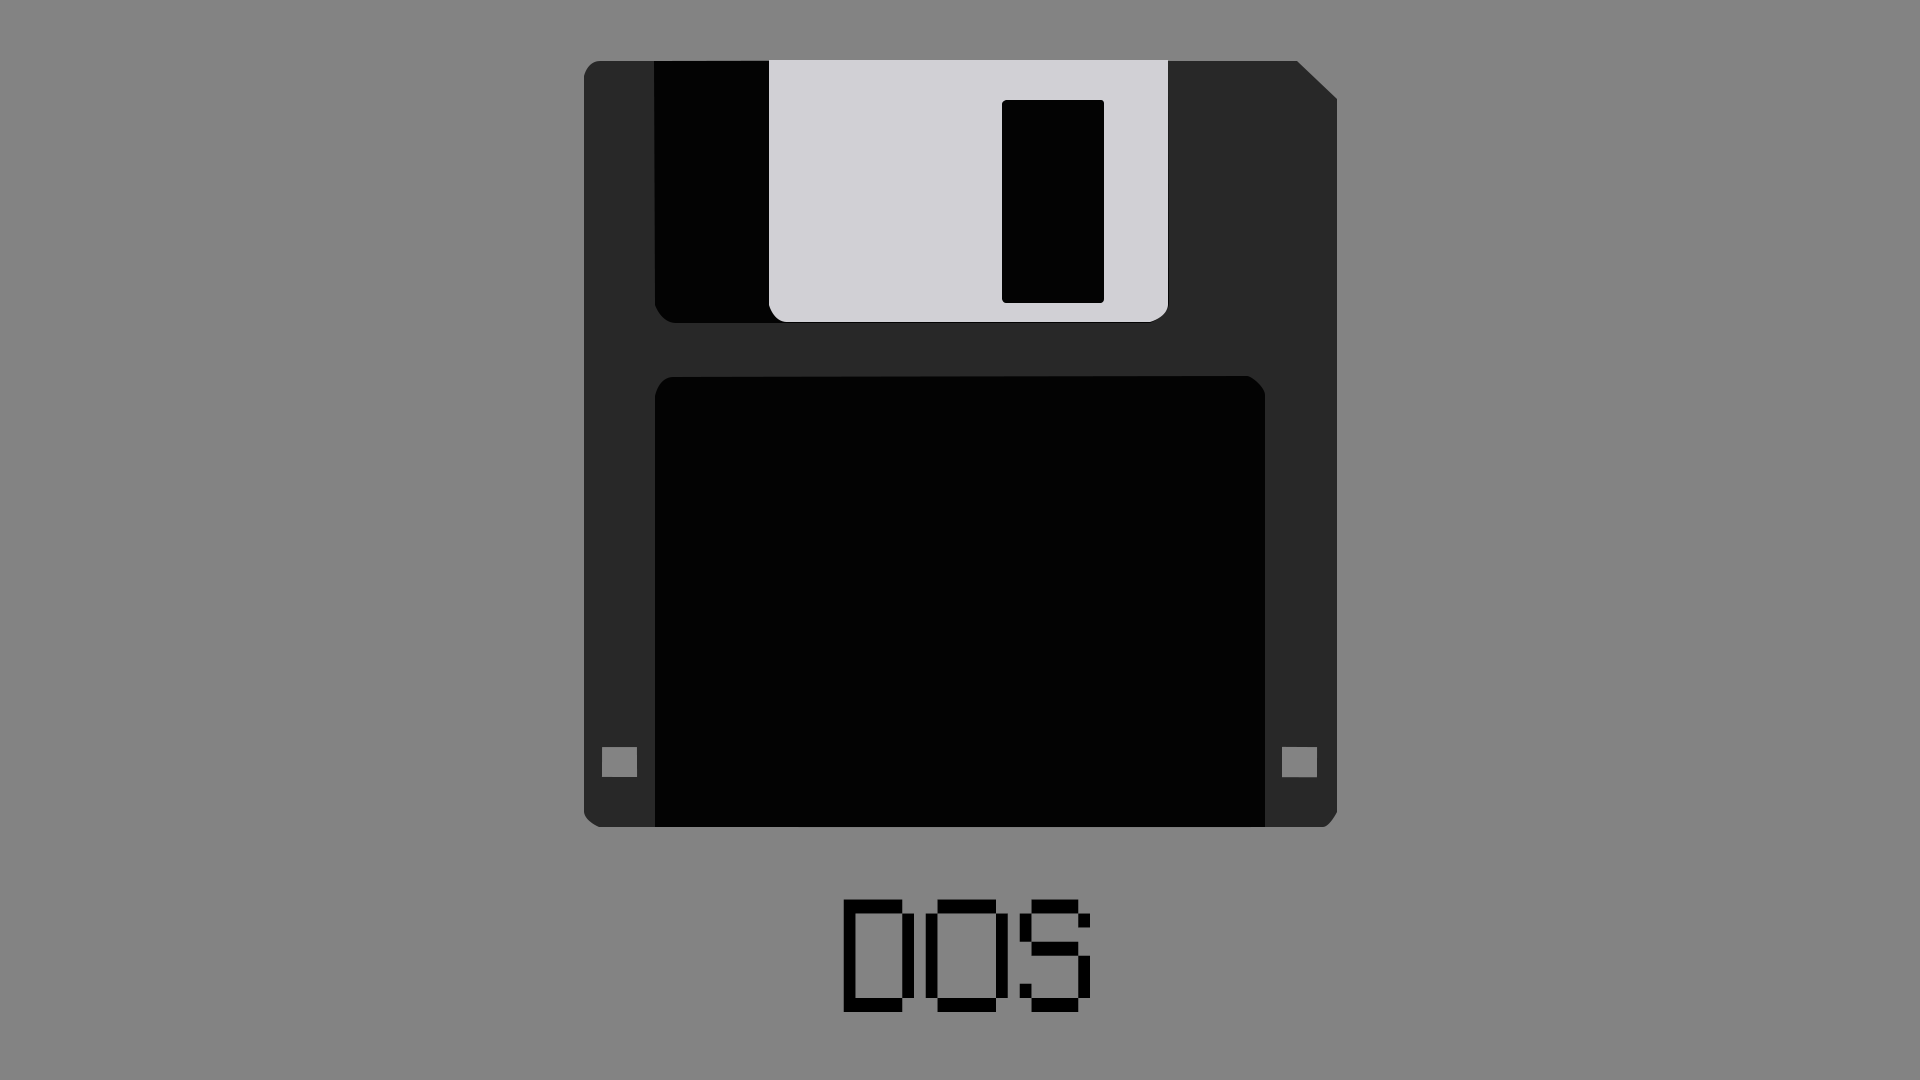 I'm A Big Fan Of MS DOS, And This Is Also My First Try At Vectoring. [1920x1080]